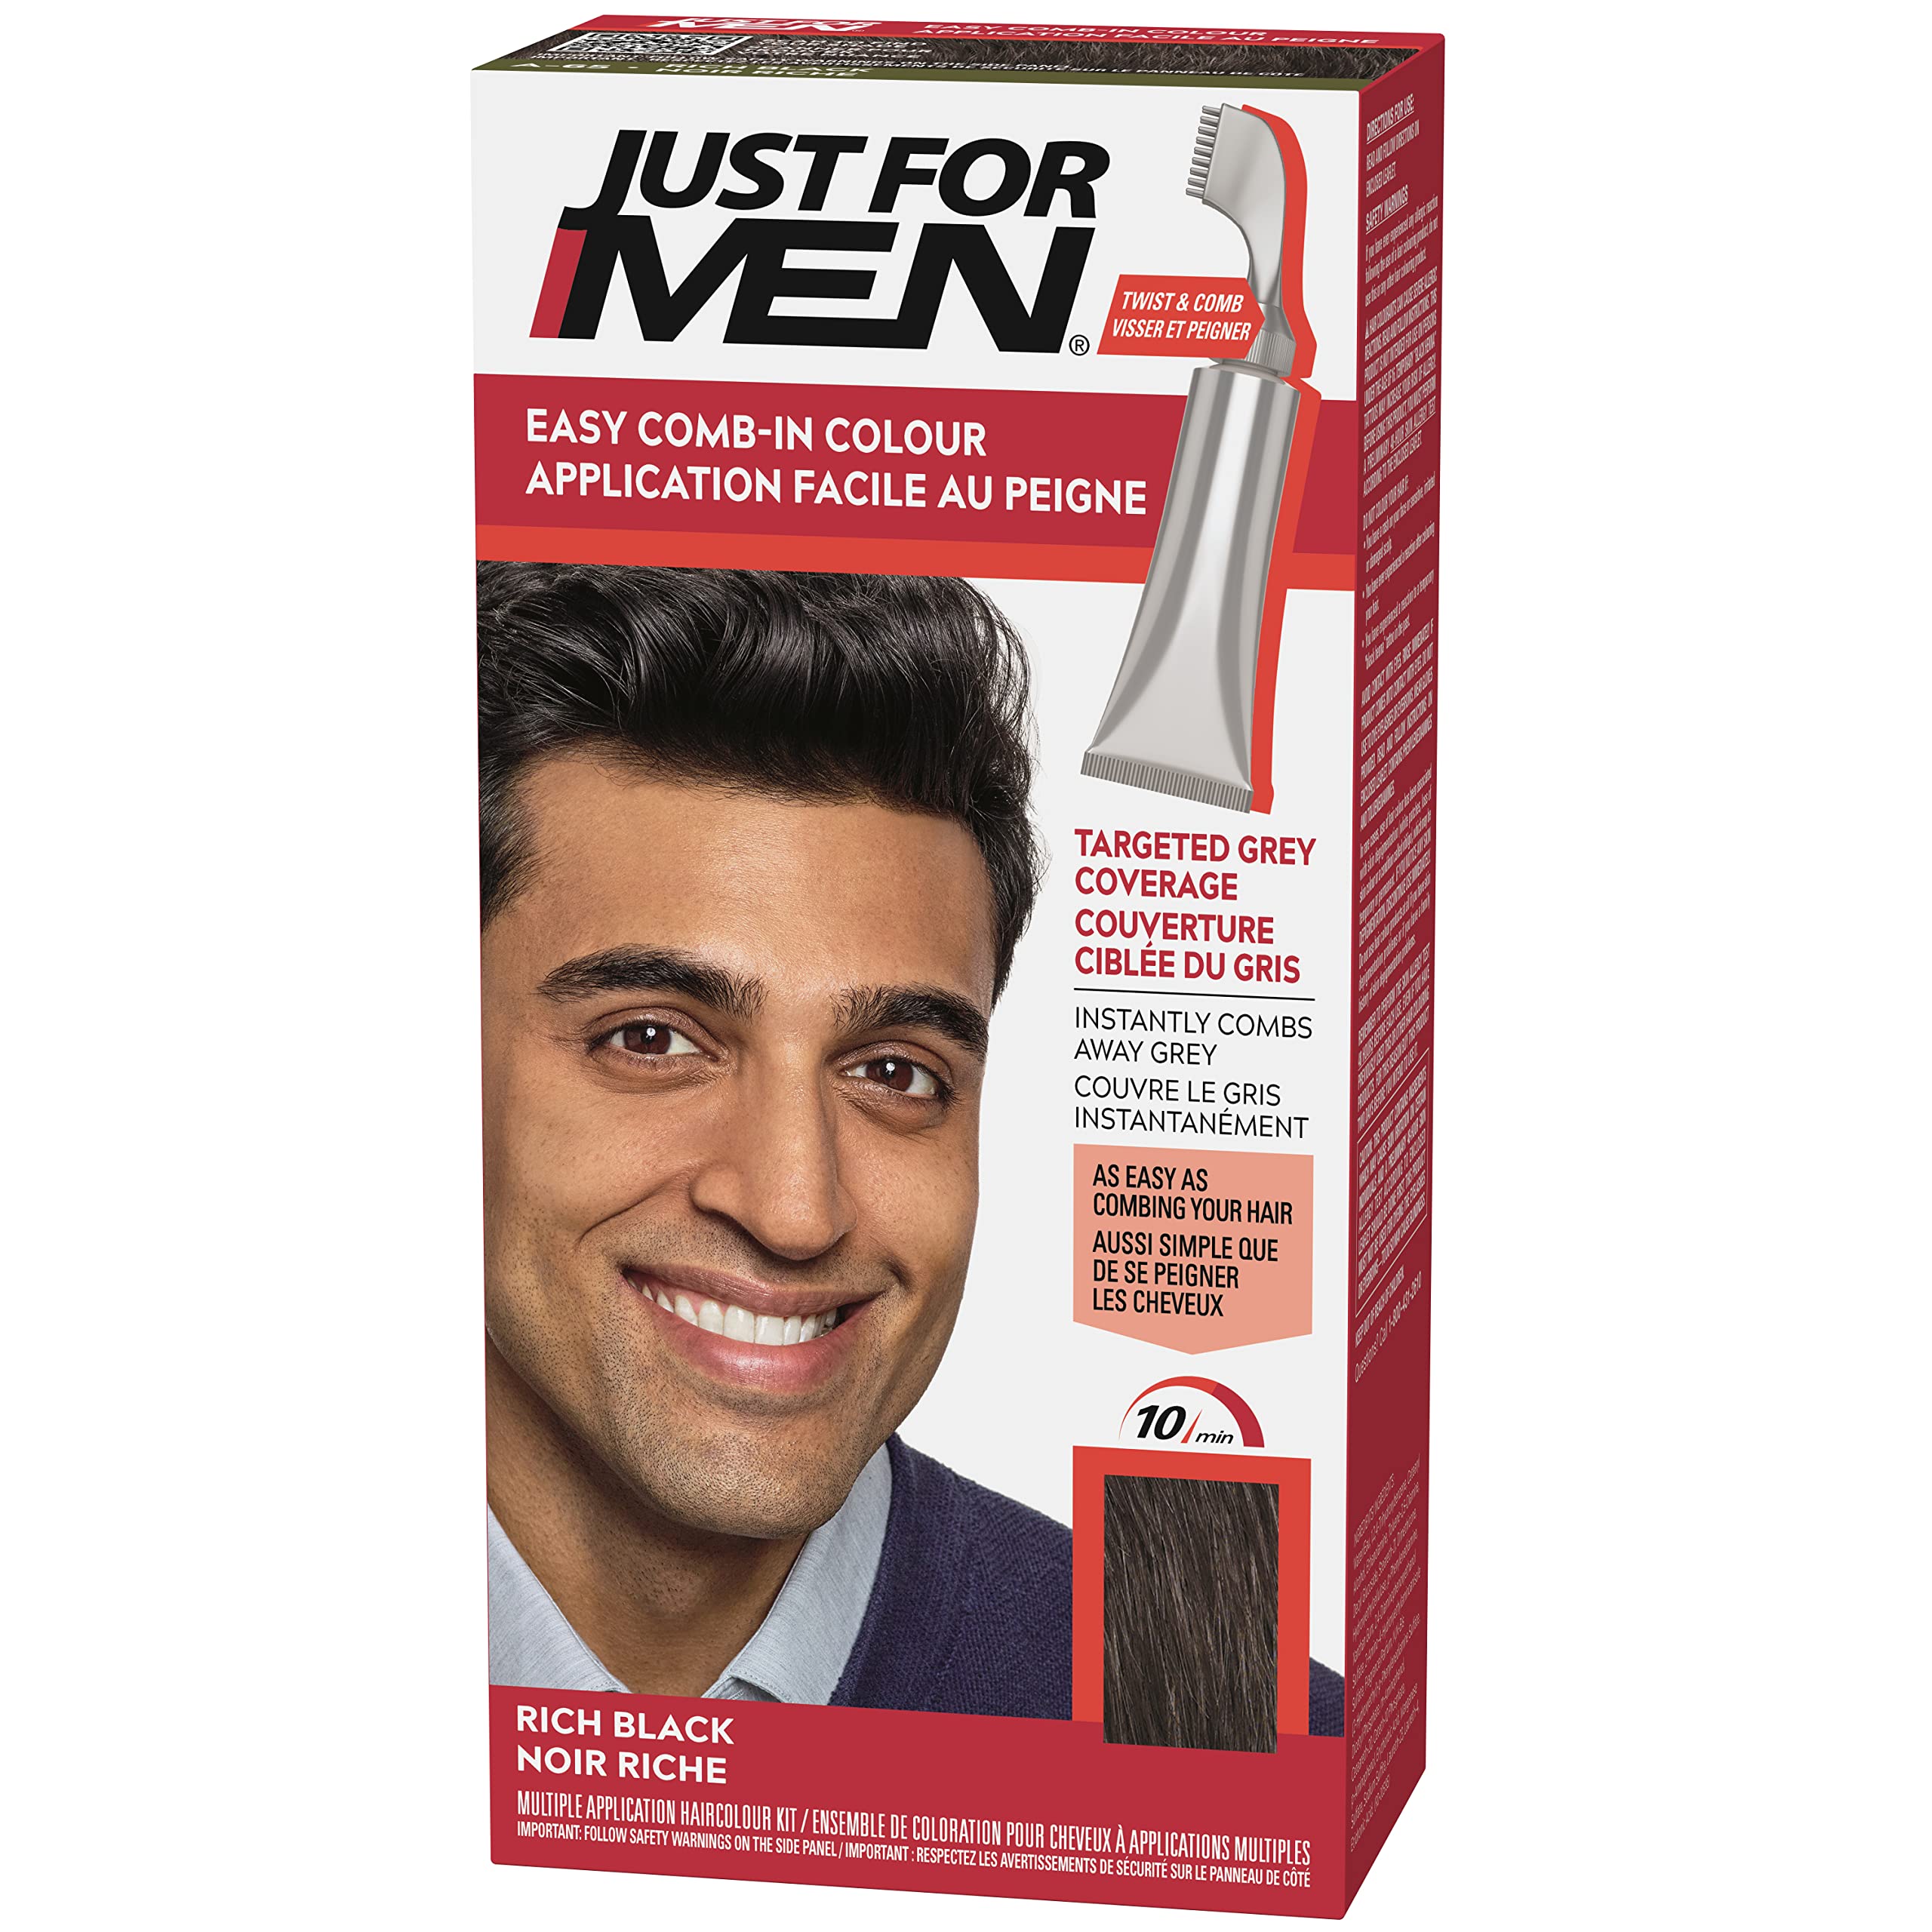 Just For Men Easy Comb-In Color Mens Hair Dye, Easy No Mix Application with Comb Applicator - Rich Black, A-65, Pack of 1